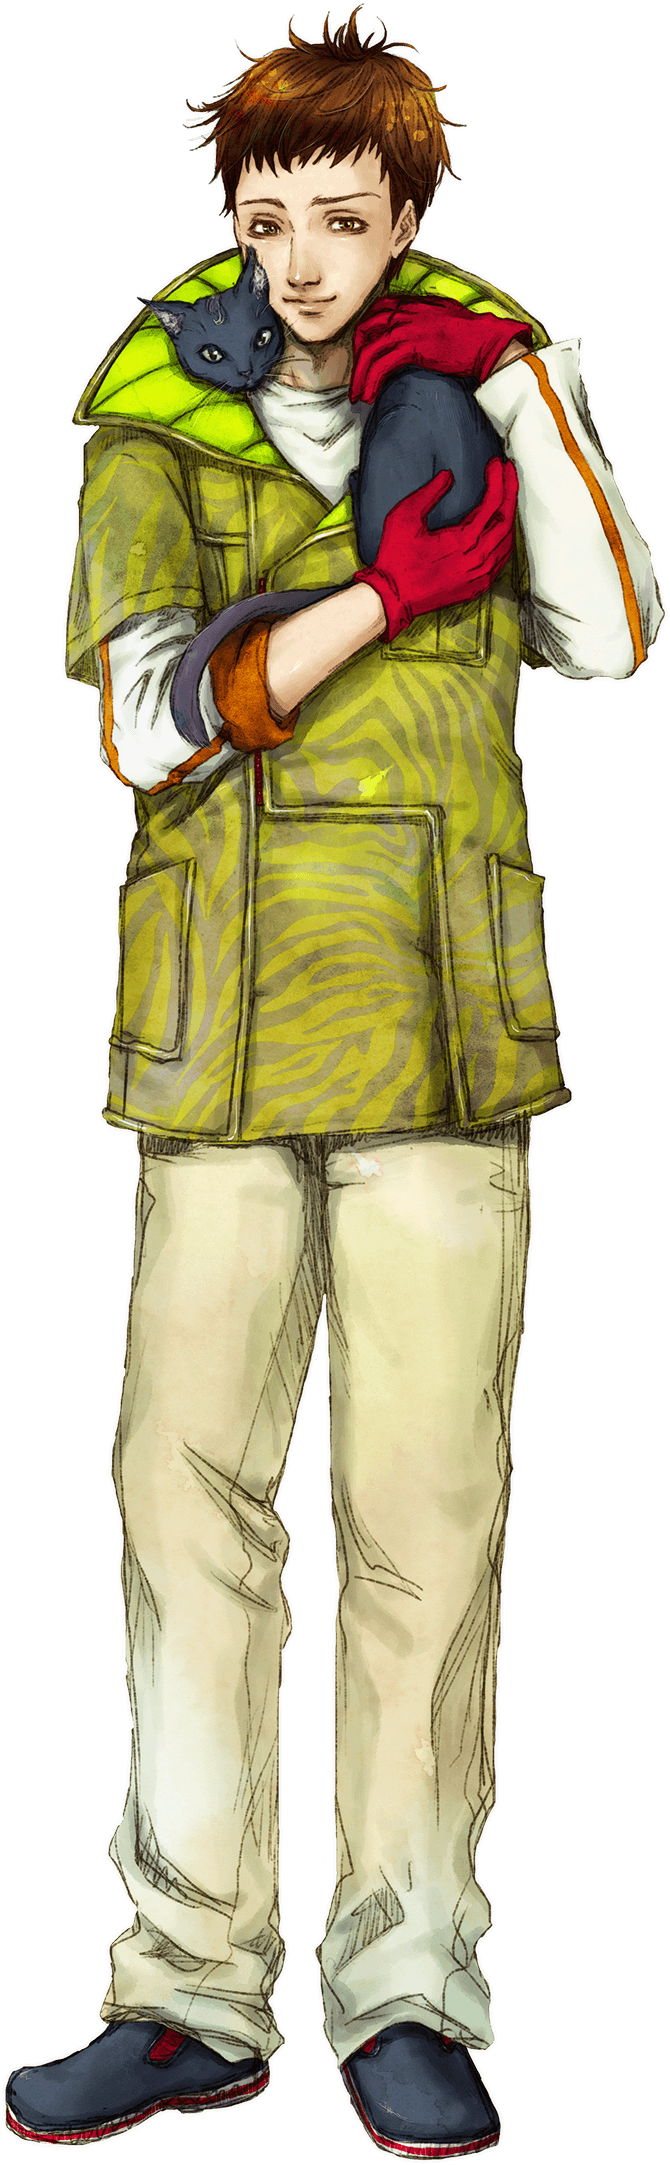 Chara_full_chipie.png